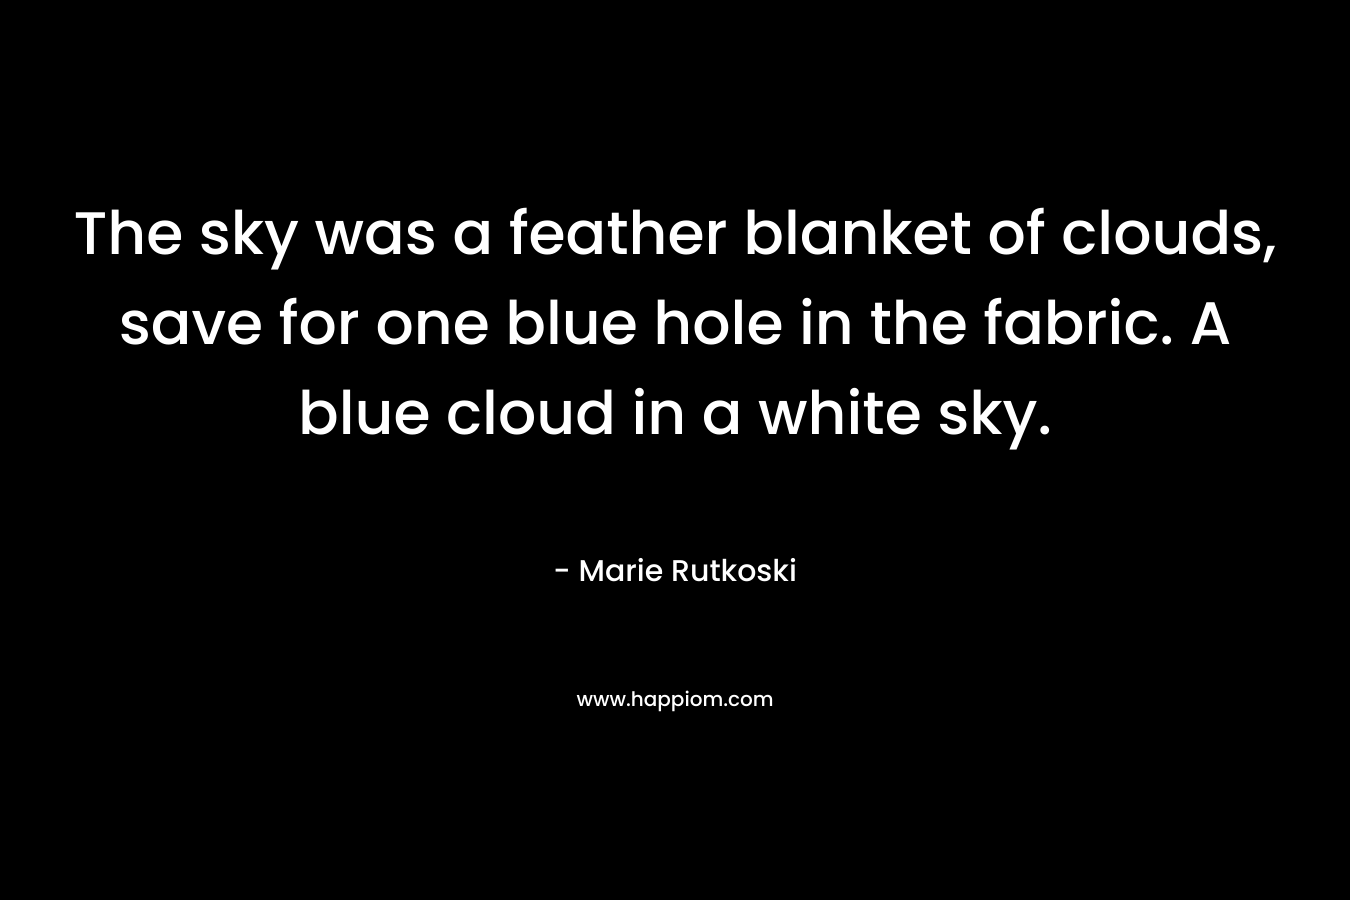 The sky was a feather blanket of clouds, save for one blue hole in the fabric. A blue cloud in a white sky.